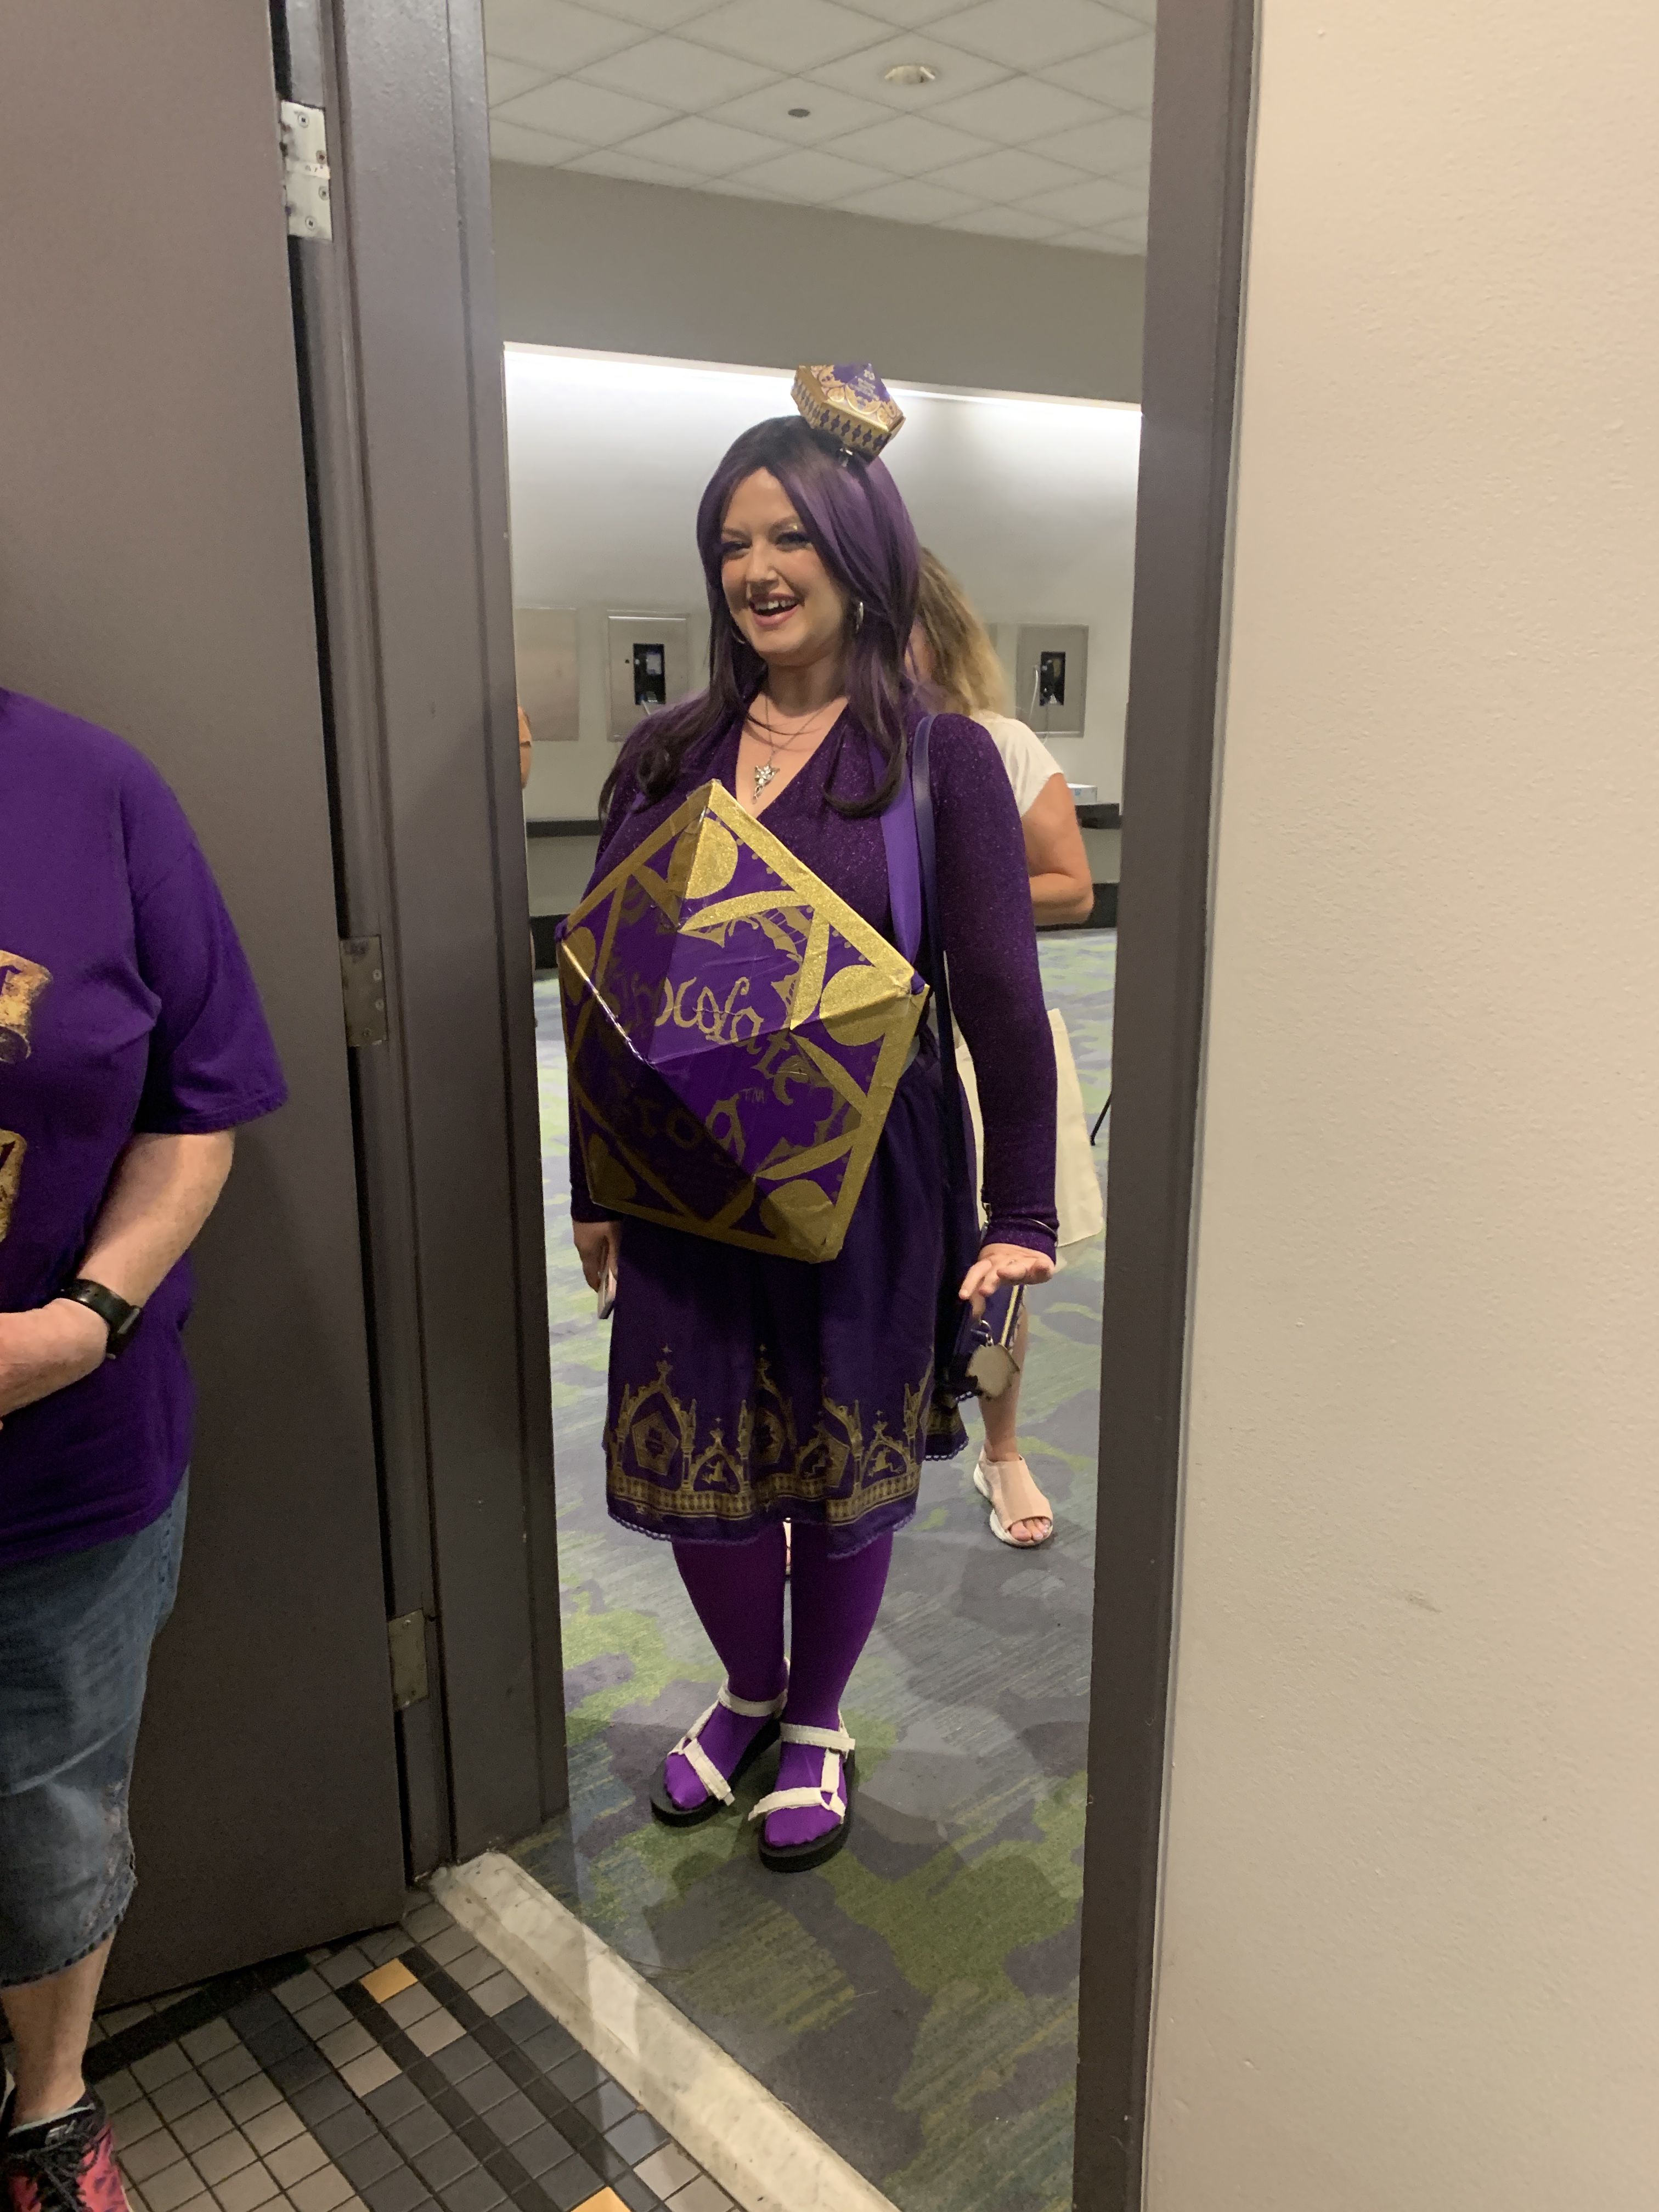 A woman dressed in cosplay as a chocolate frog wearing all purple and with a purple wig.